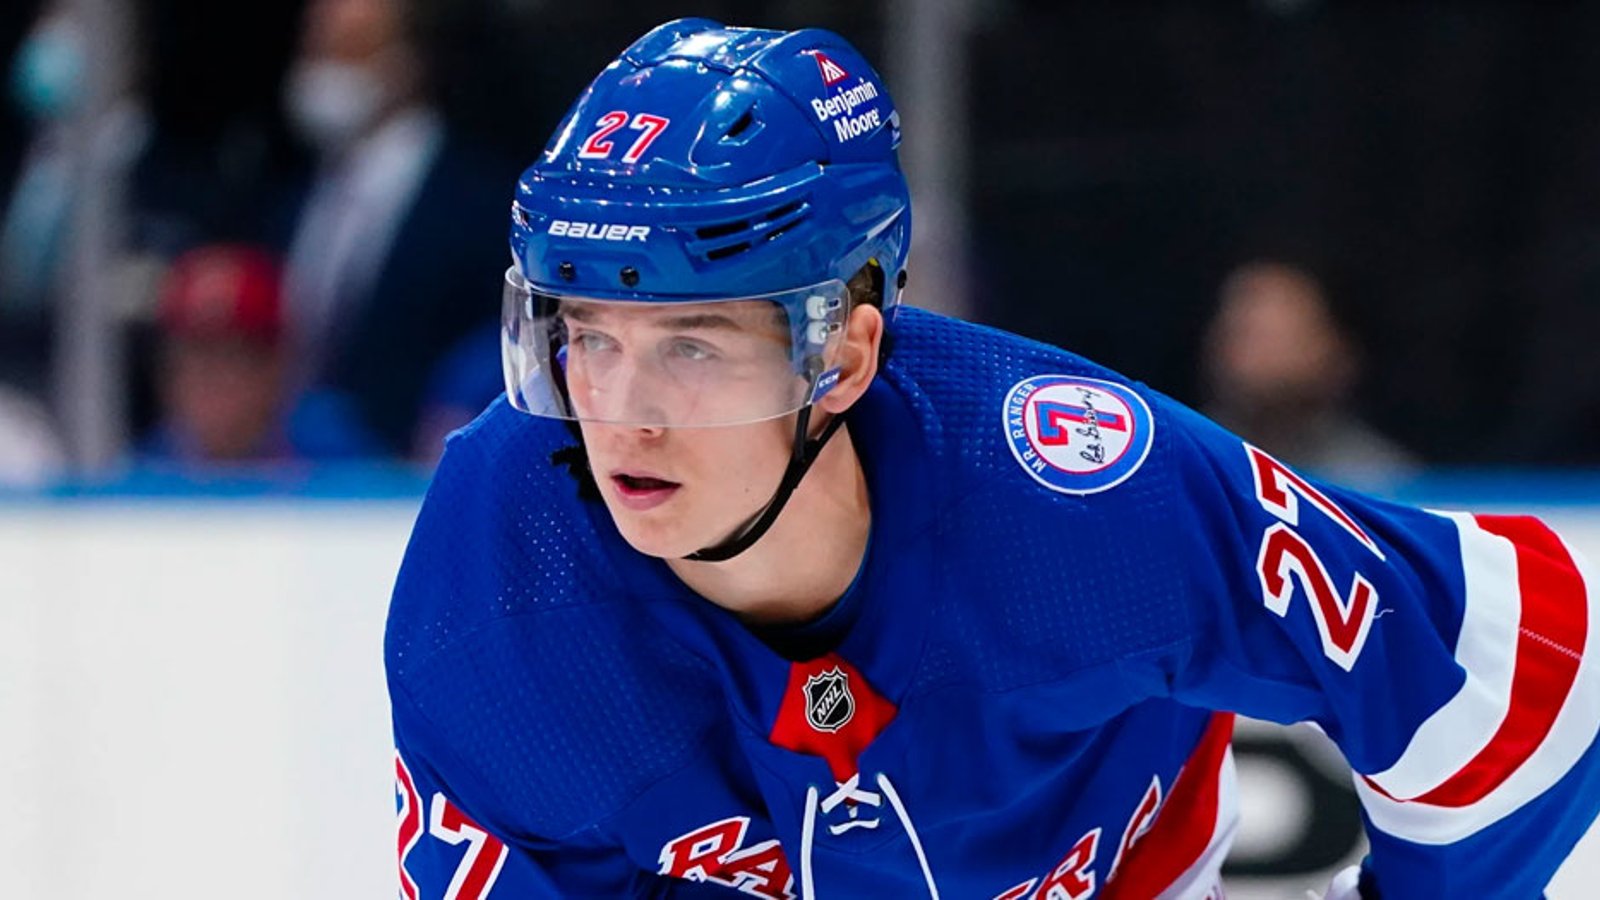 Trade Alert: Rangers have reportedly traded top prospect Nils Lundkvist